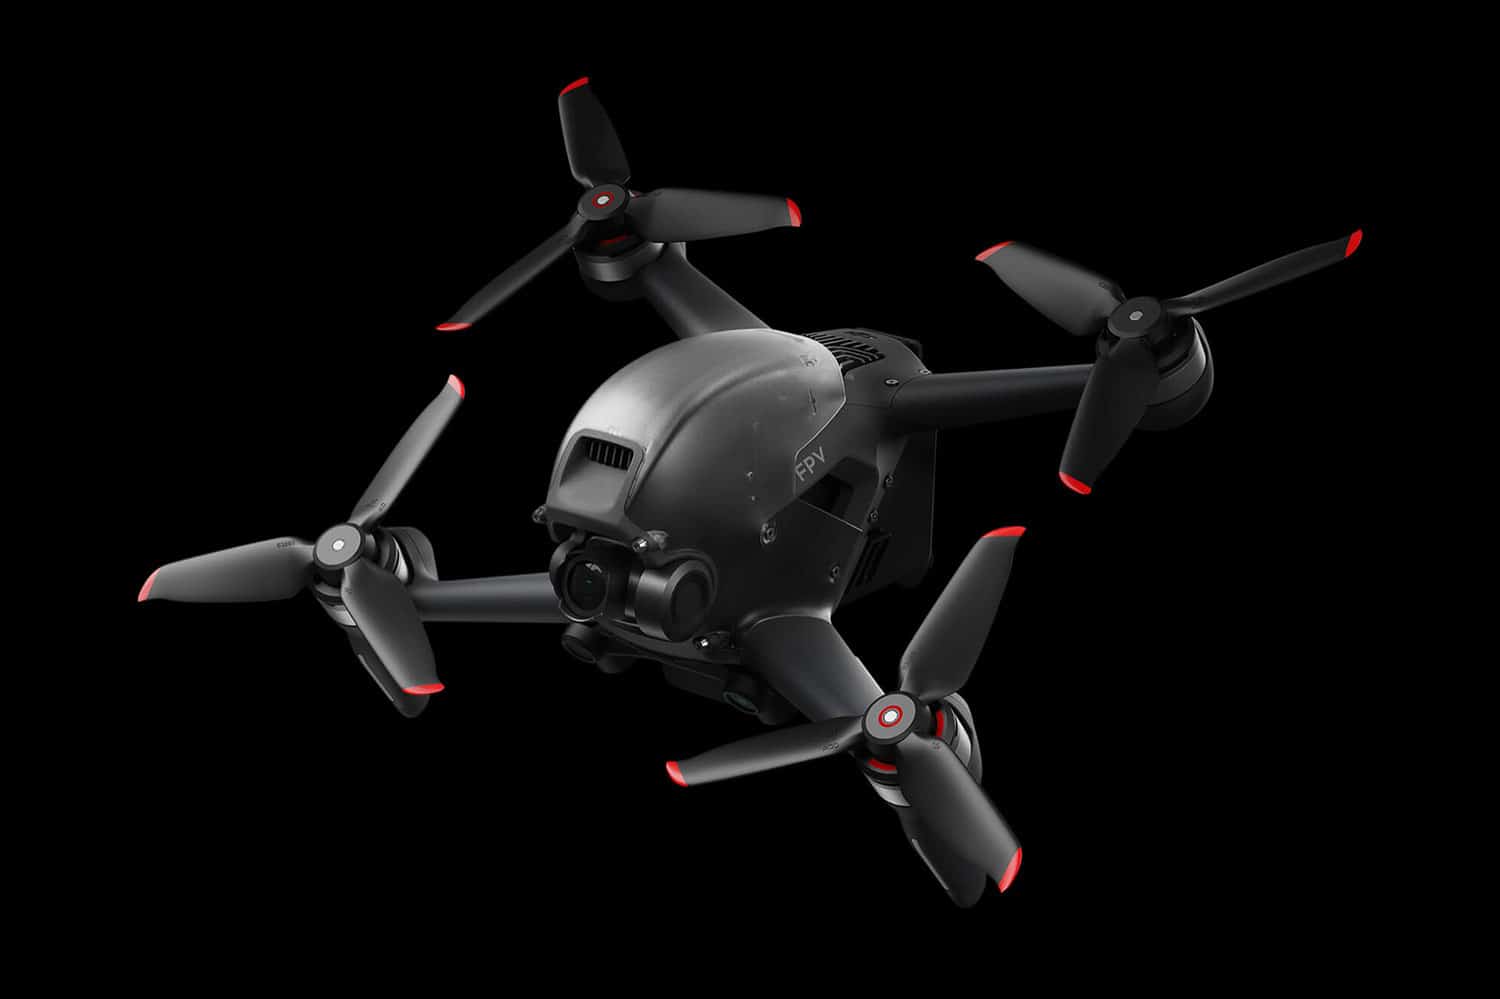 DJI unveils new FPV racer drone with advanced safety features